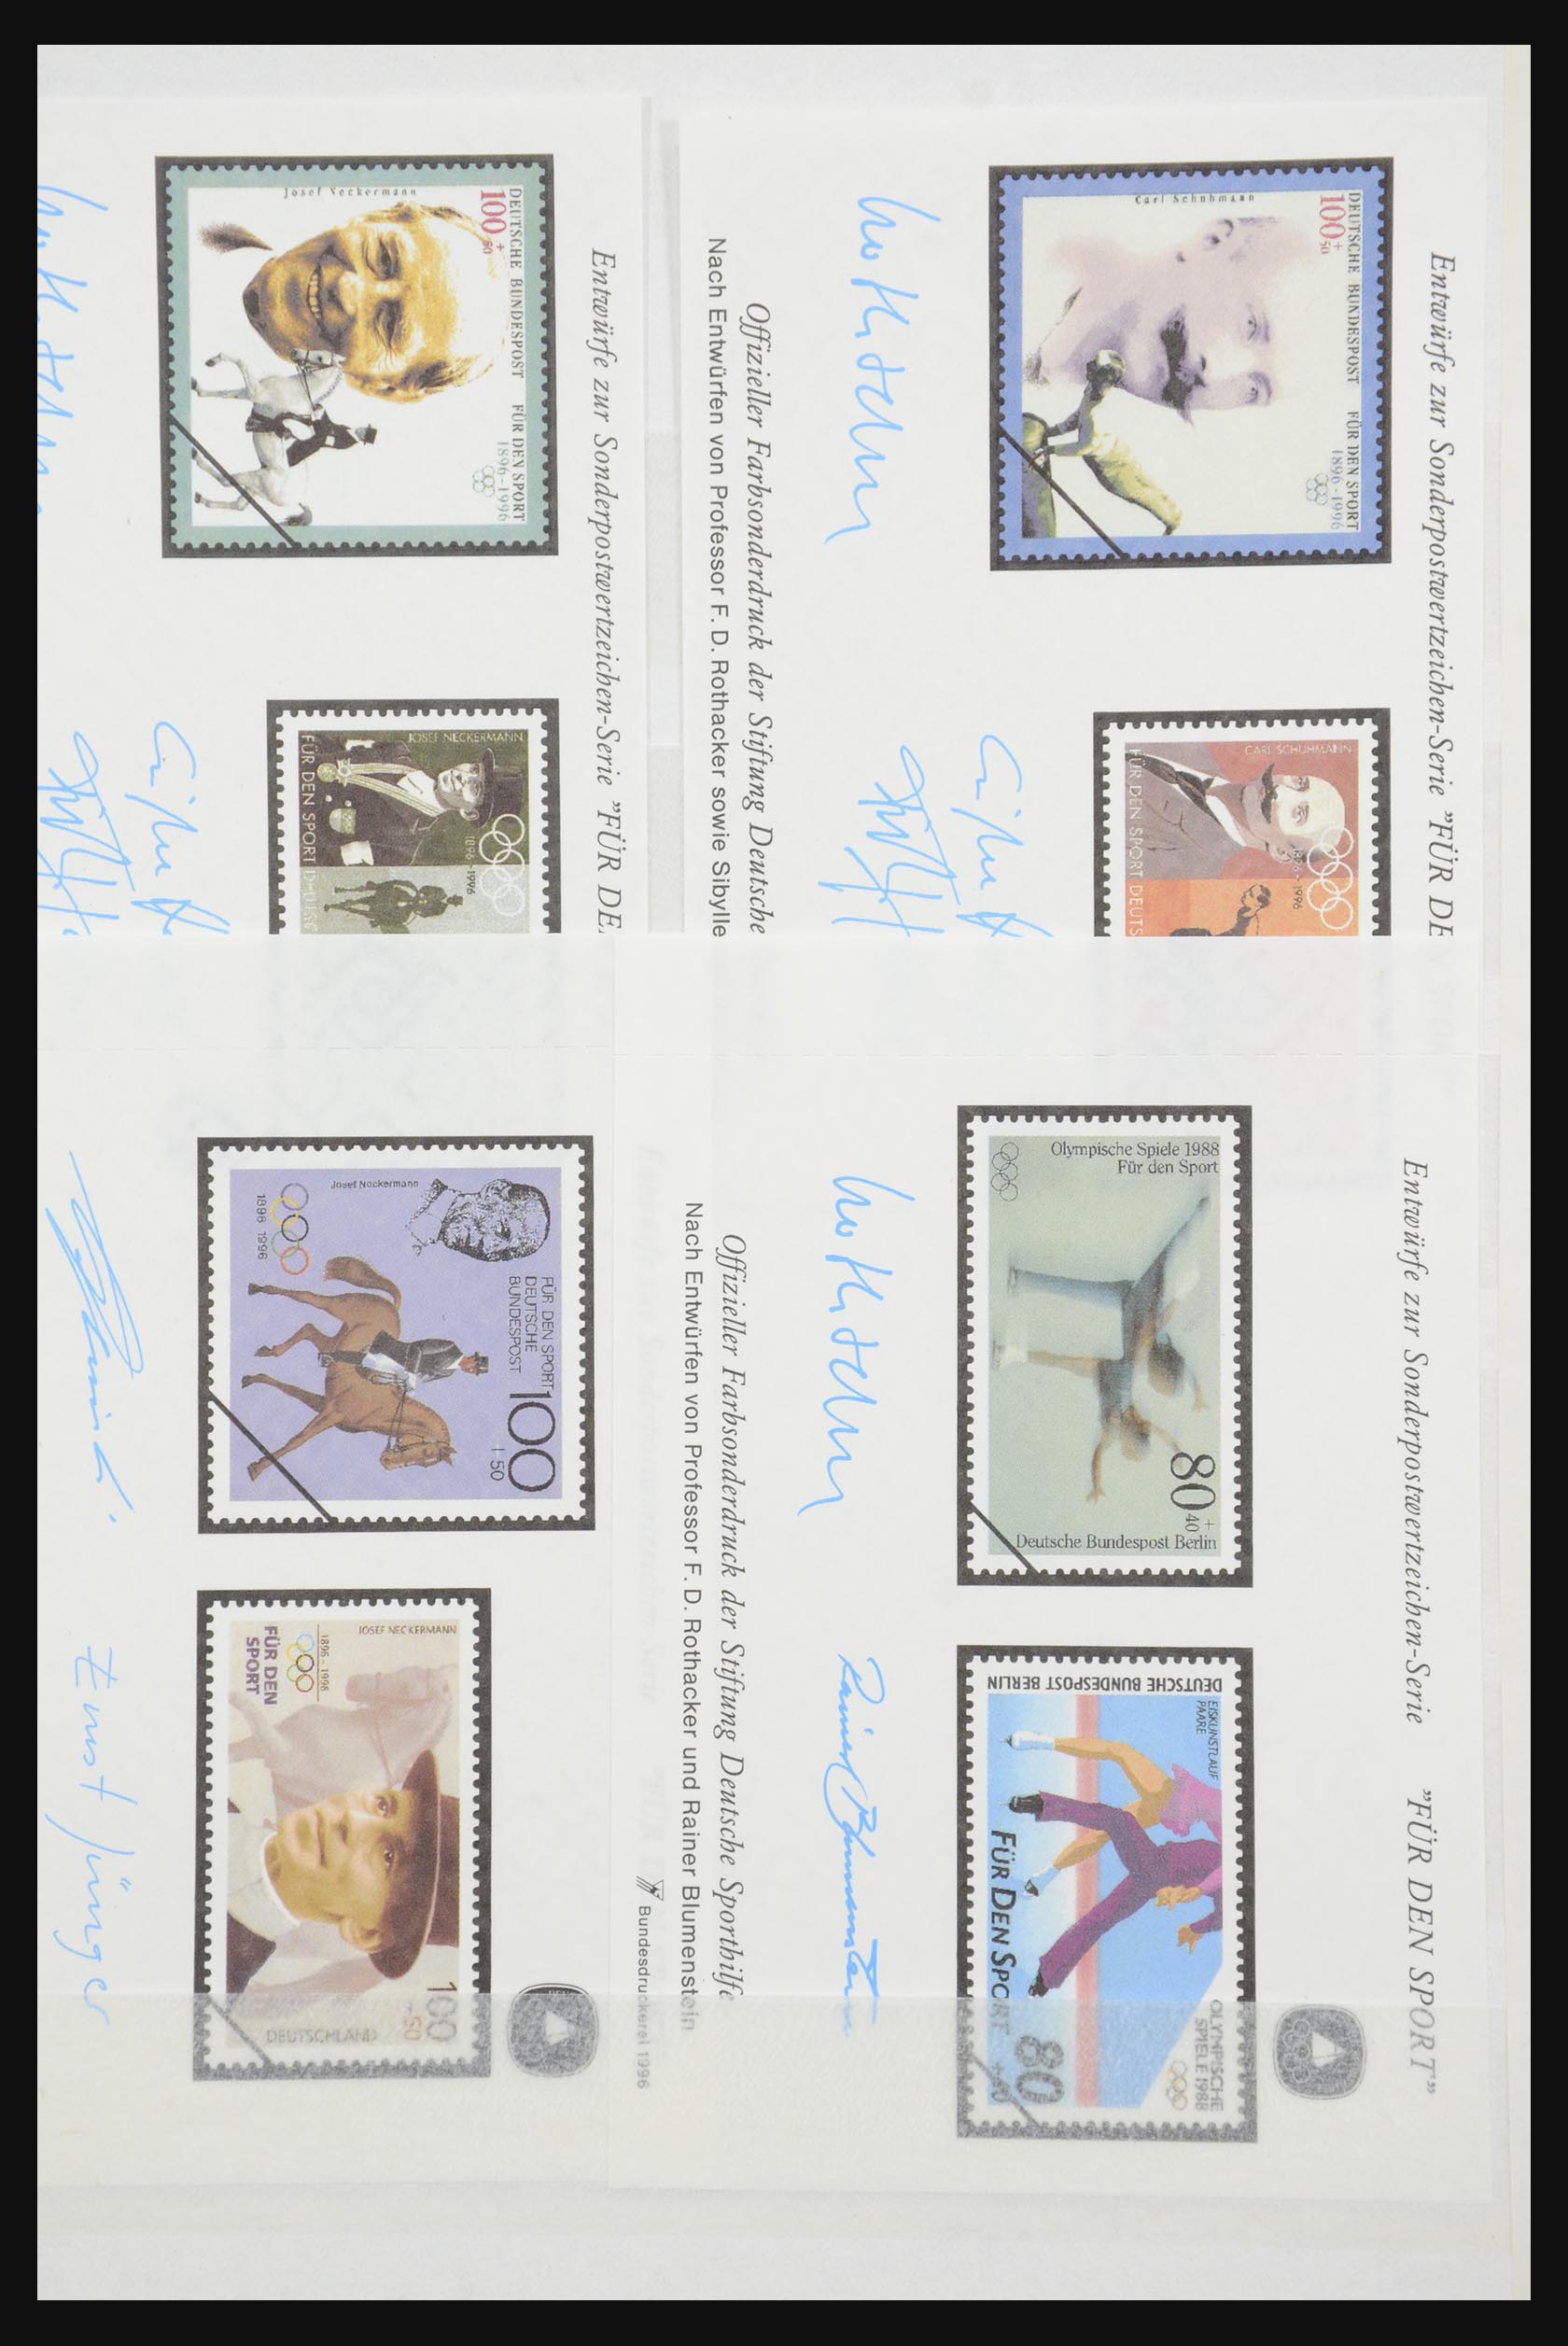 32050 054 - 32050 Bundespost special sheets 1980-2010.